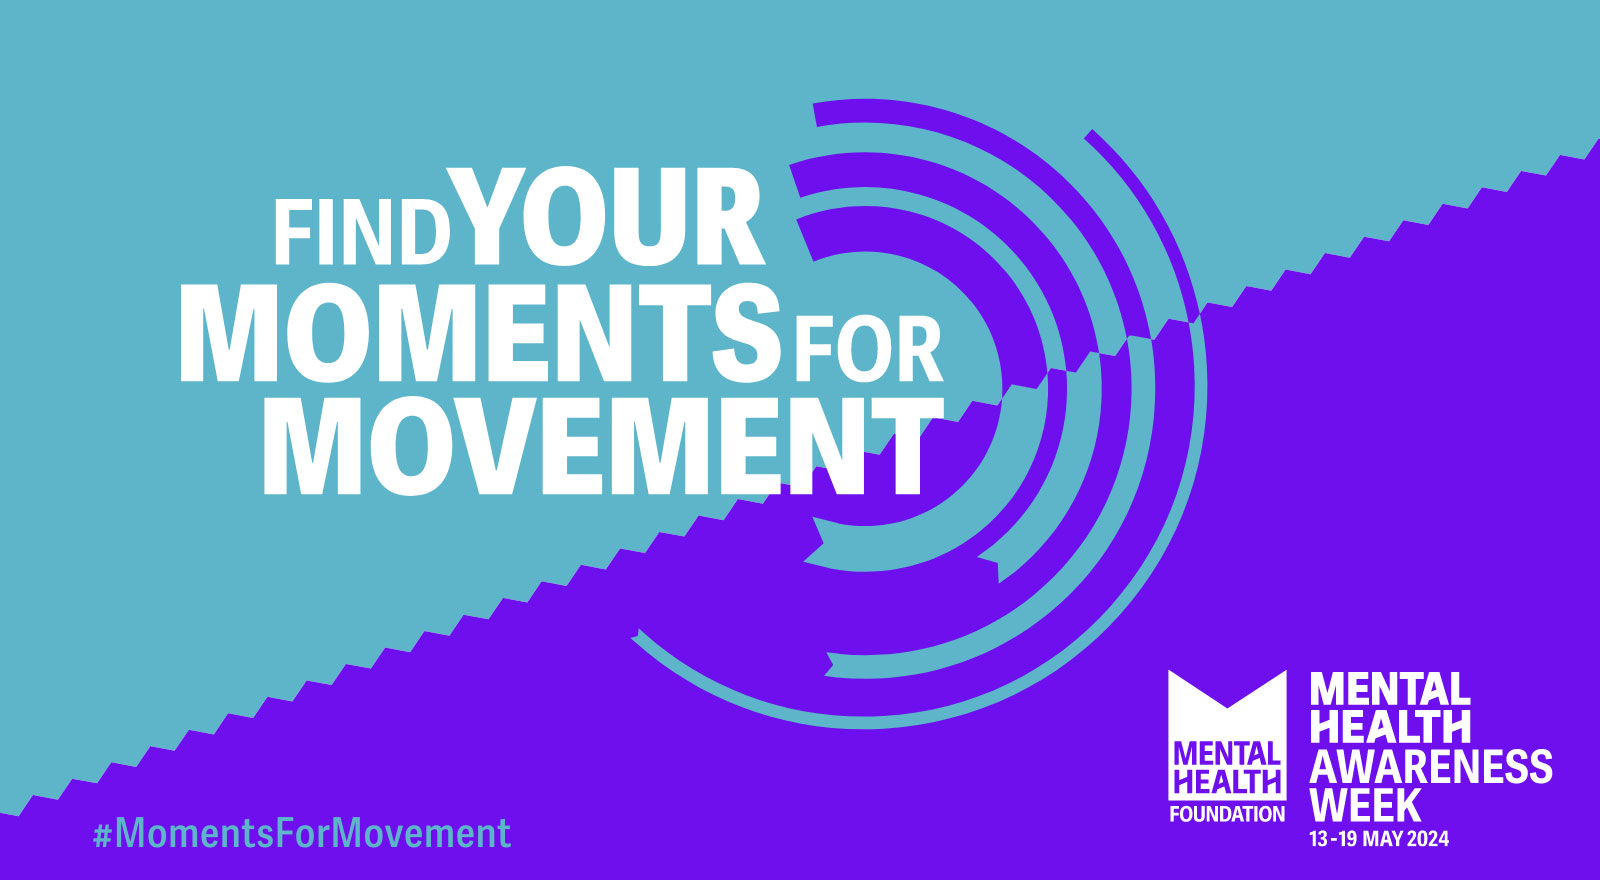 An image of the Moments For Movement logo